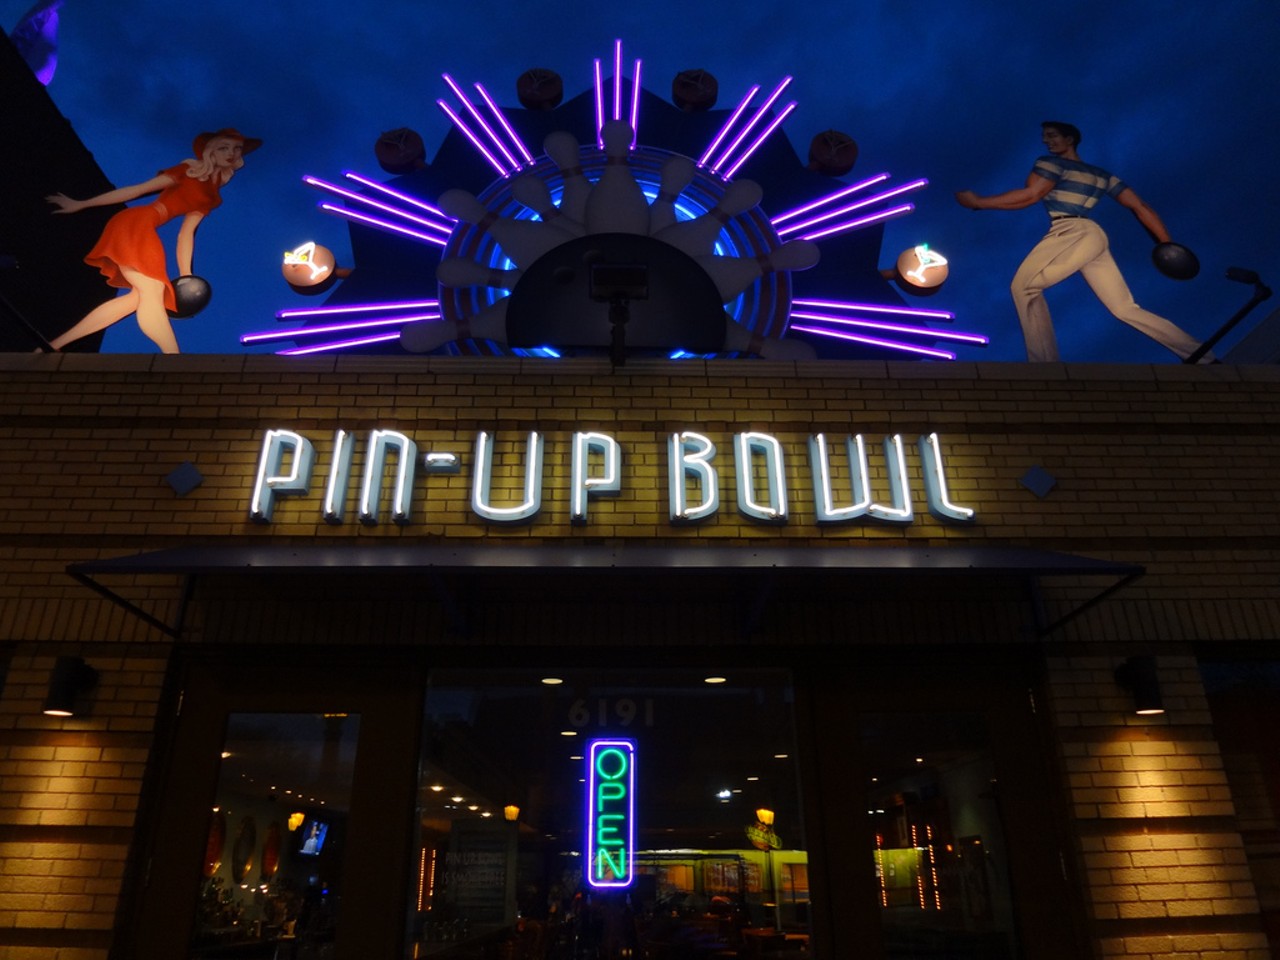 Pin-Up Bowl
6191 Delmar Blvd.
St. Louis, MO 63112
(314) 727-5555
Lovers of alcohol-fueled sports might want to check out Pin-Up Bowl. Roll until 2 a.m. surrounded by 1940s-era kitsch in the Delmar Loop bowling alley. Photo courtesy of Flickr / Paul Sableman.